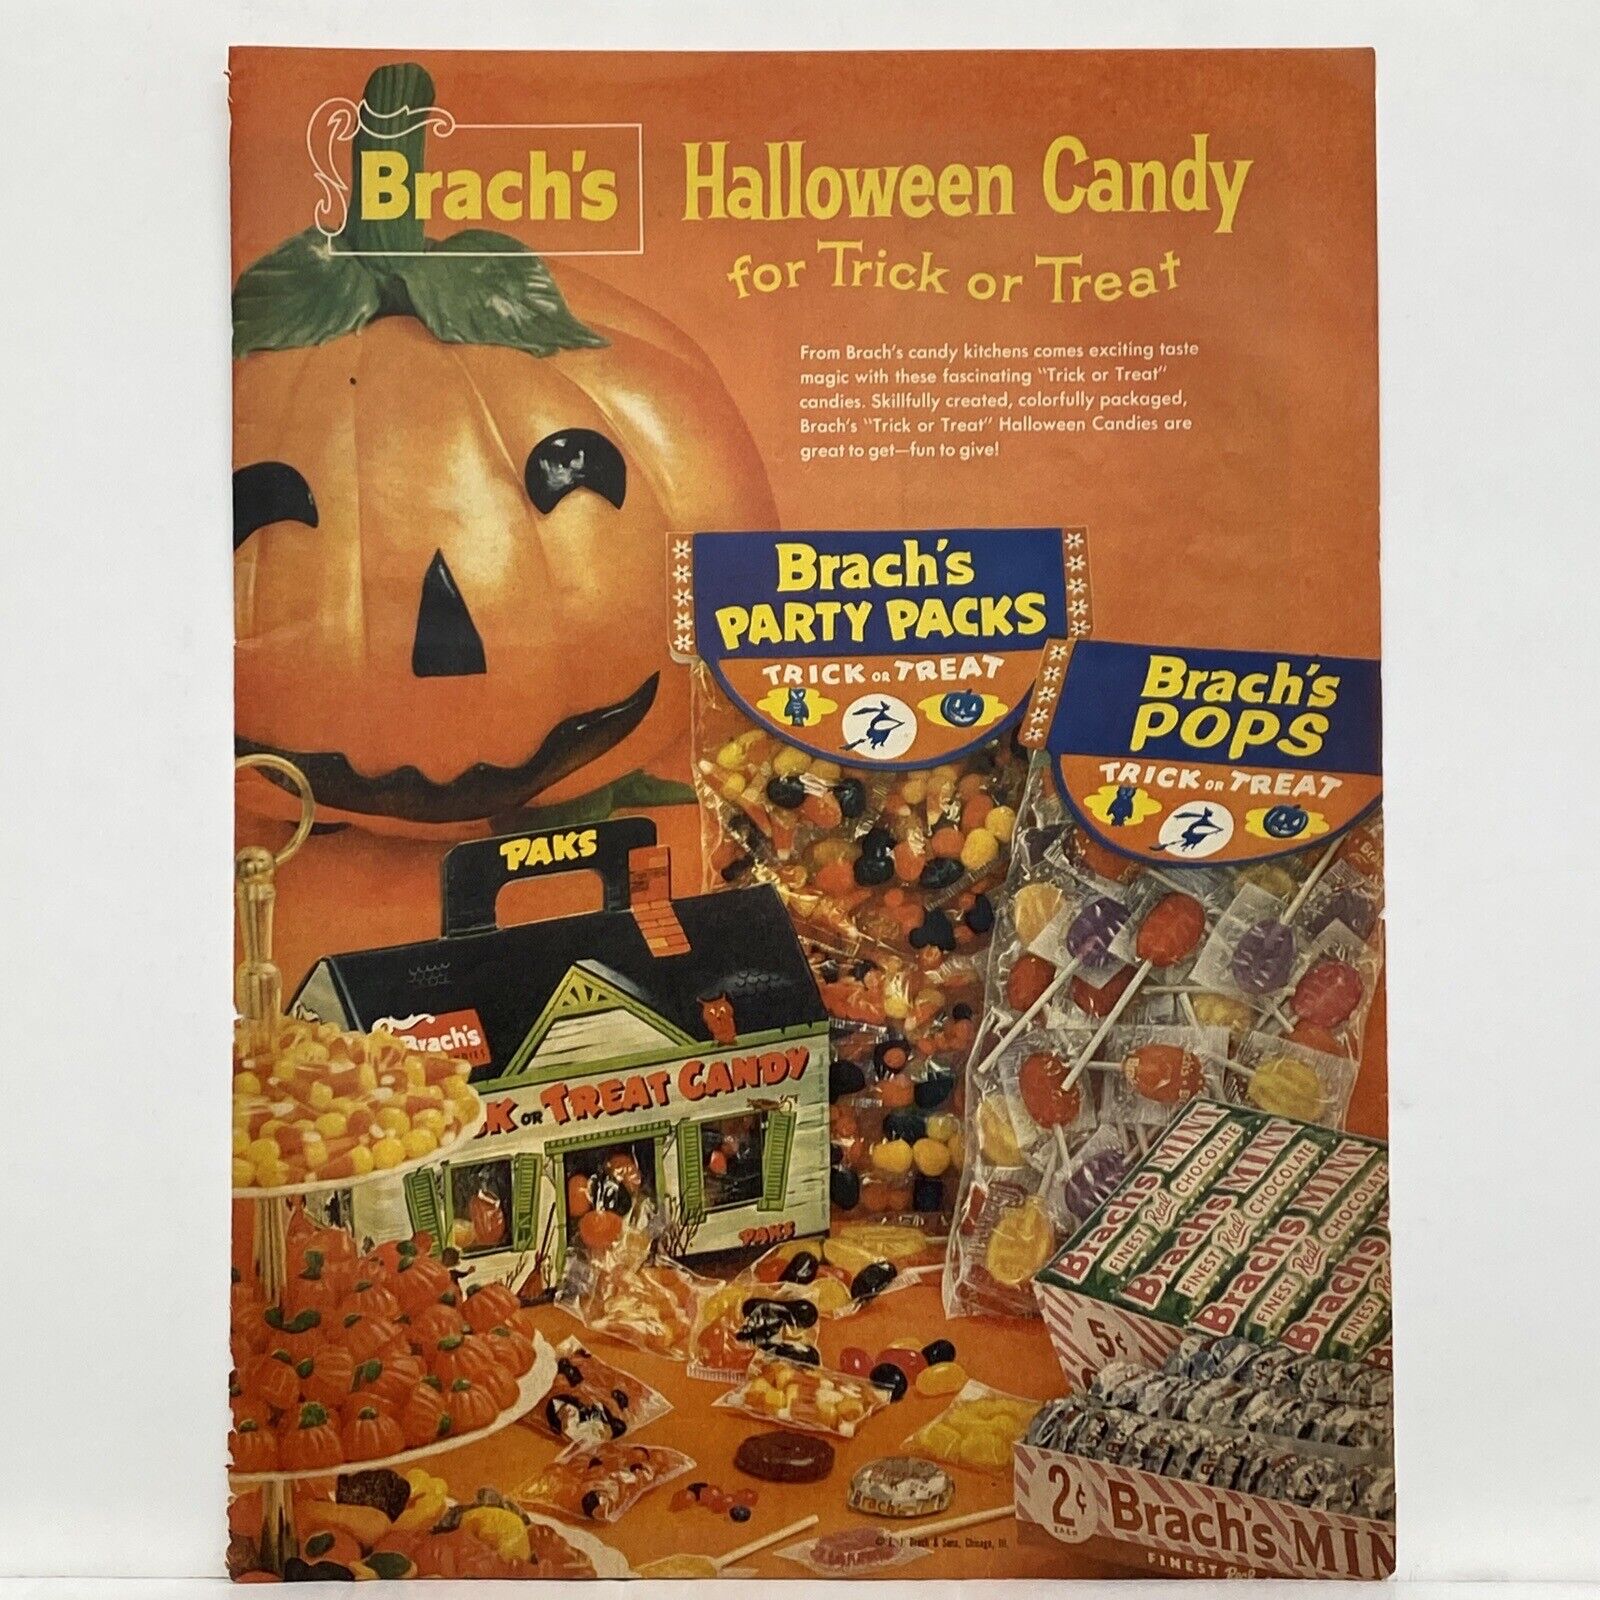 1958 Brach's Halloween Candy Print Ad Vintage Pumpkin Trick or Treat Party Packs